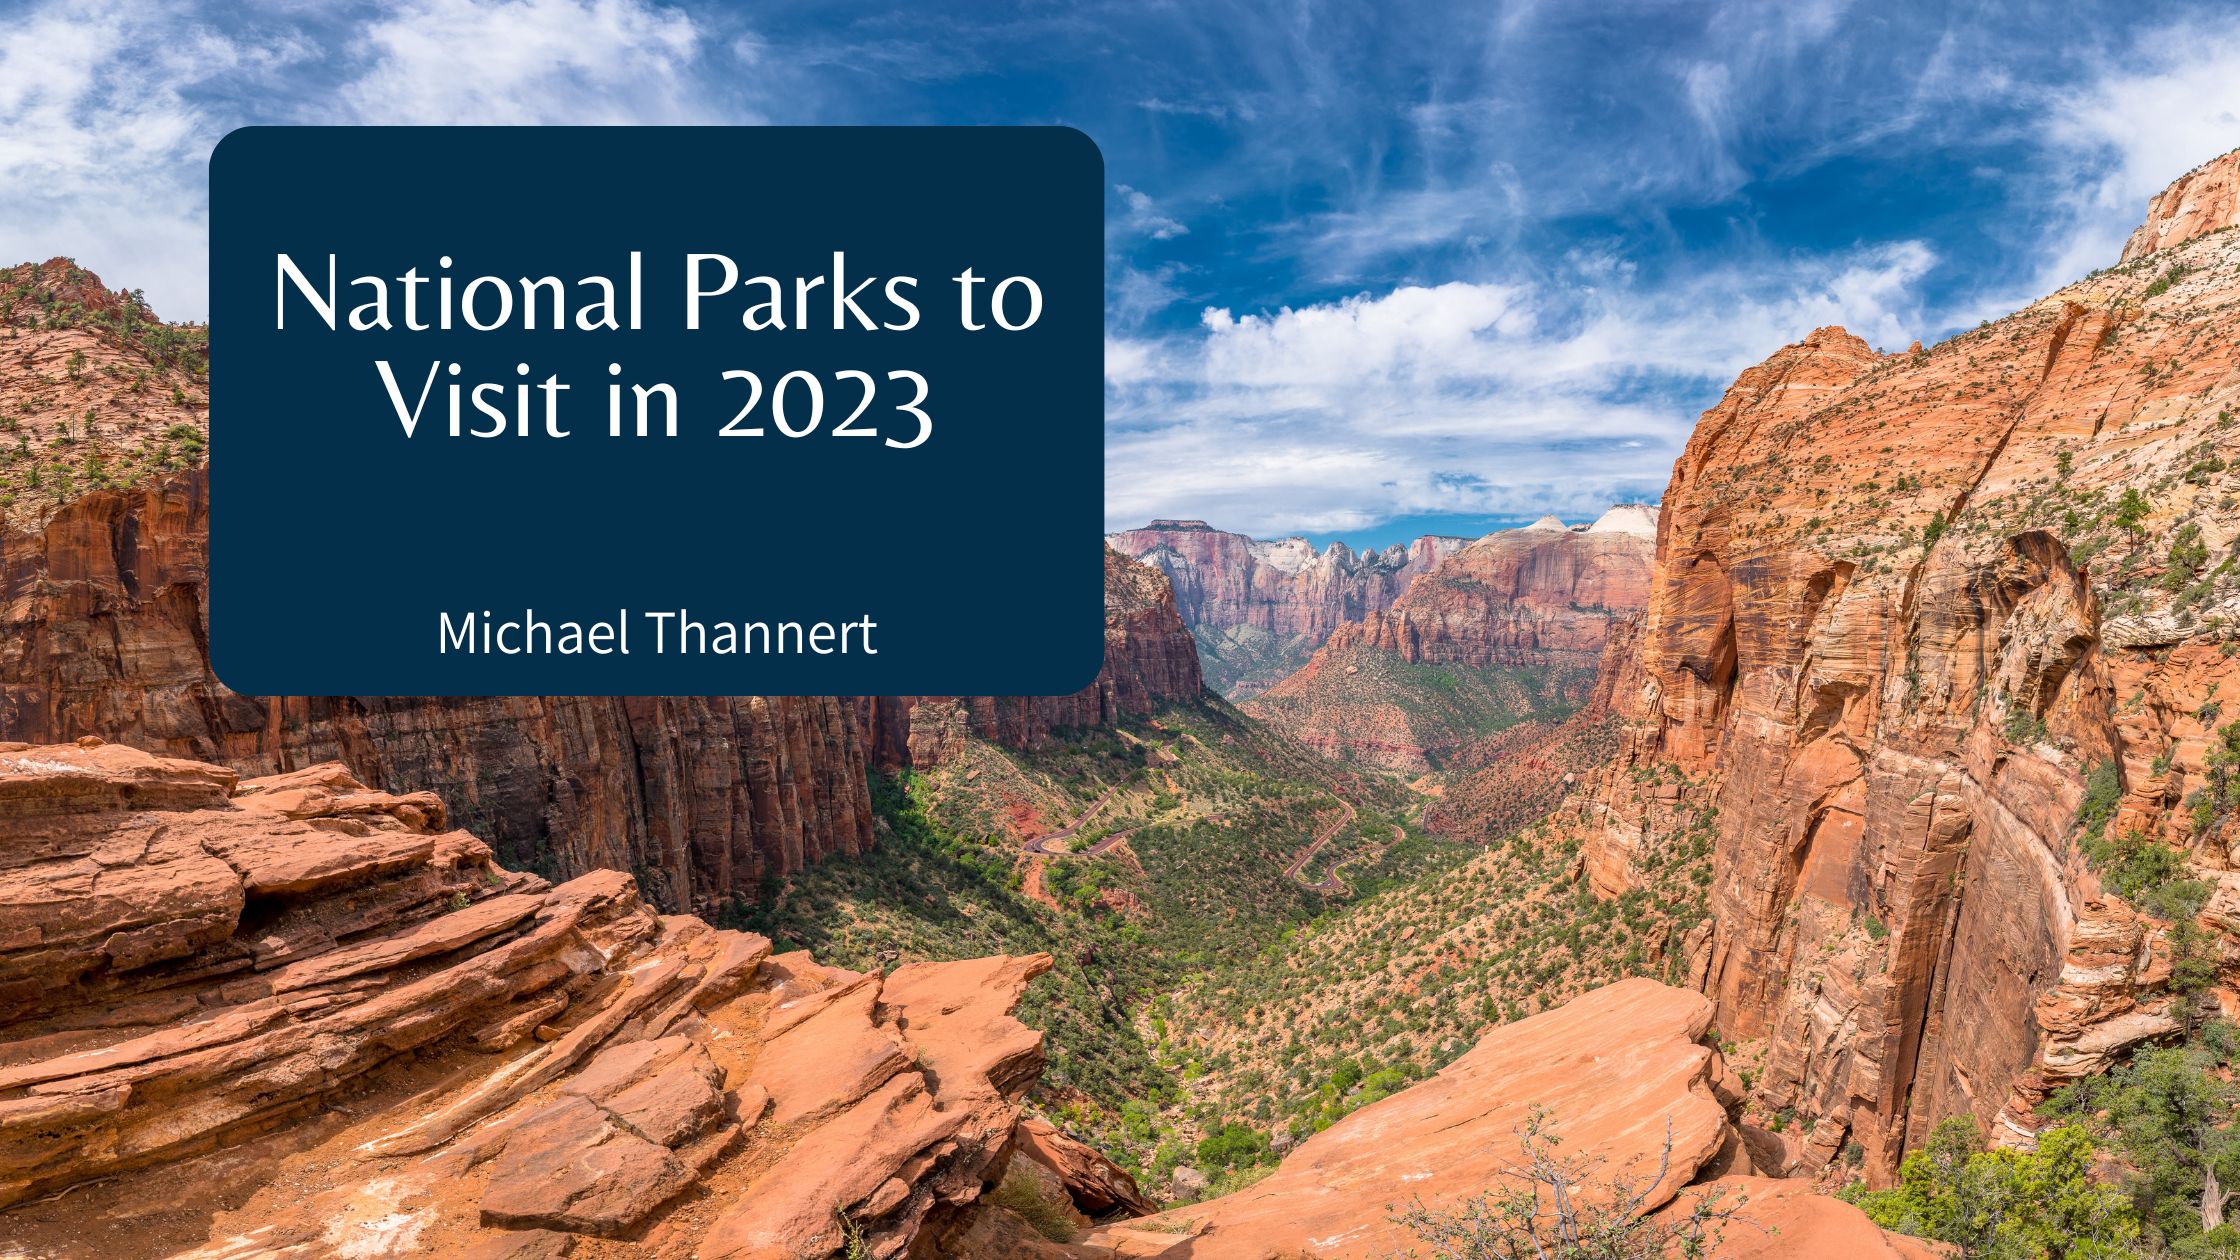 Michael Thannert - National Parks to Visit in 2023